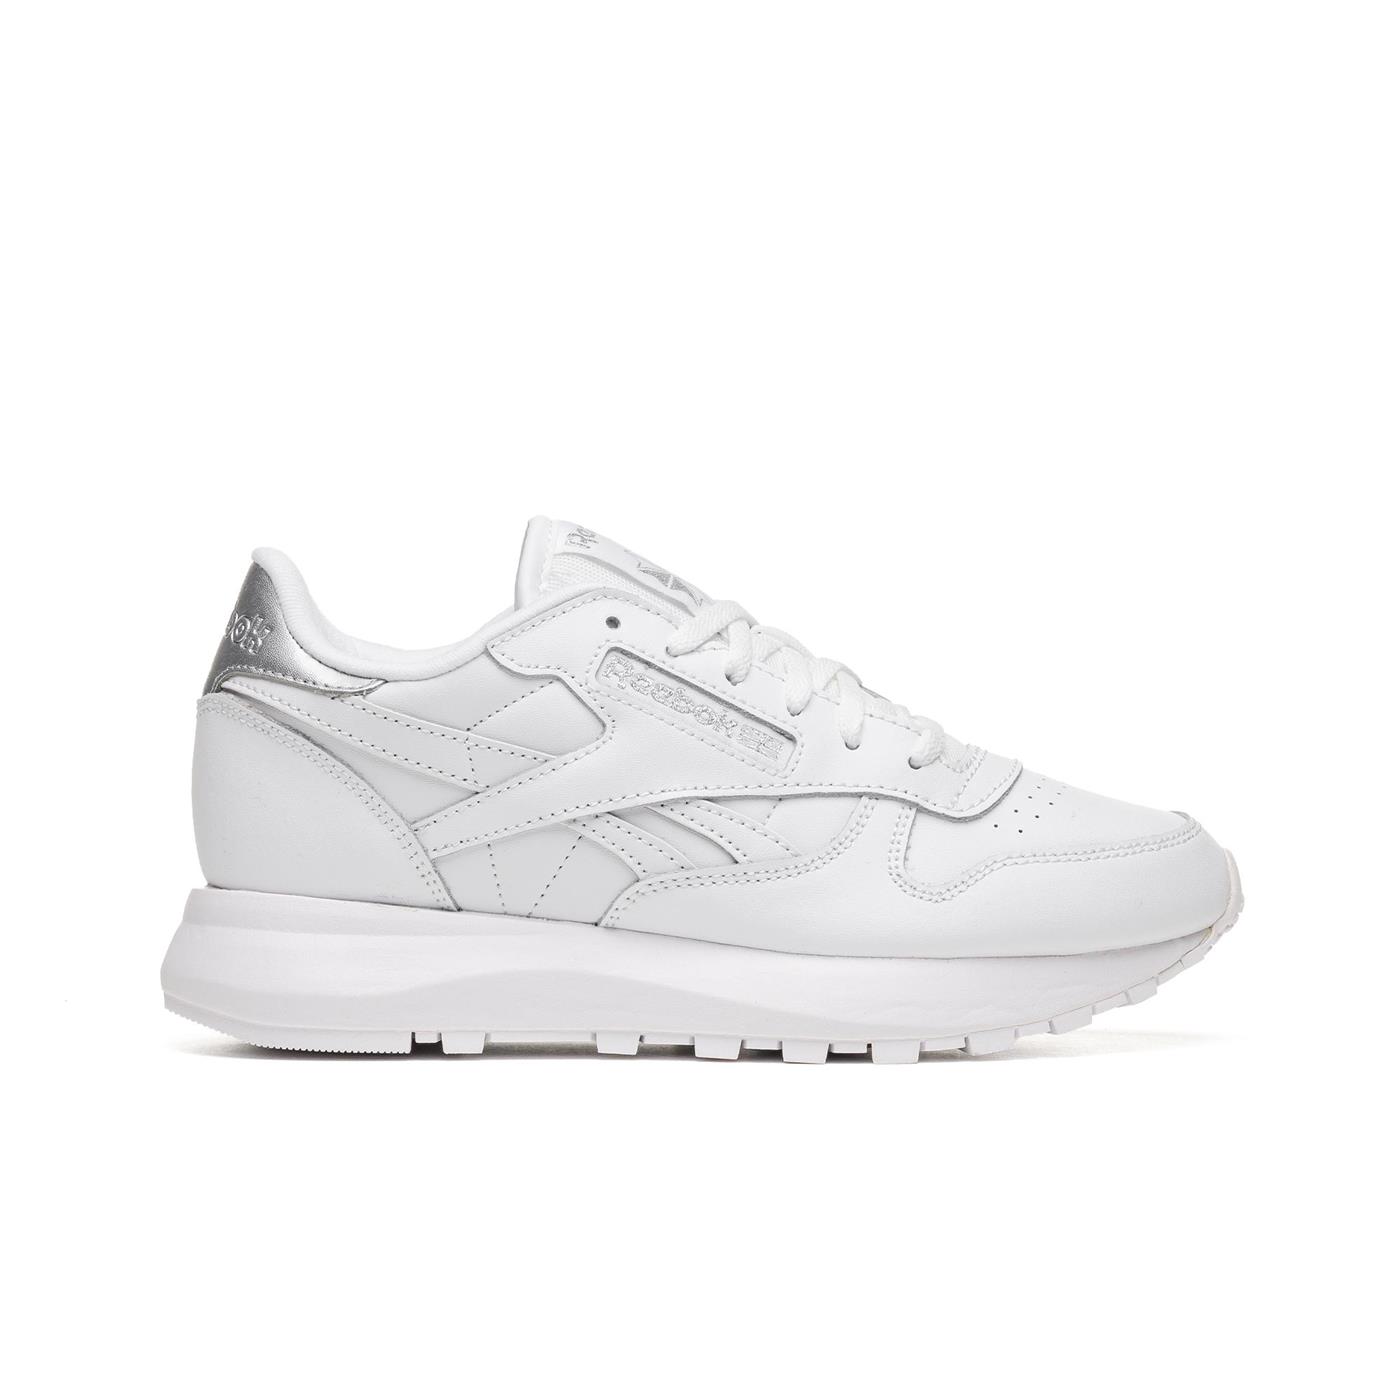 Sneakers REEBOK Classic Leather SP for GW7227 XTREME.PT